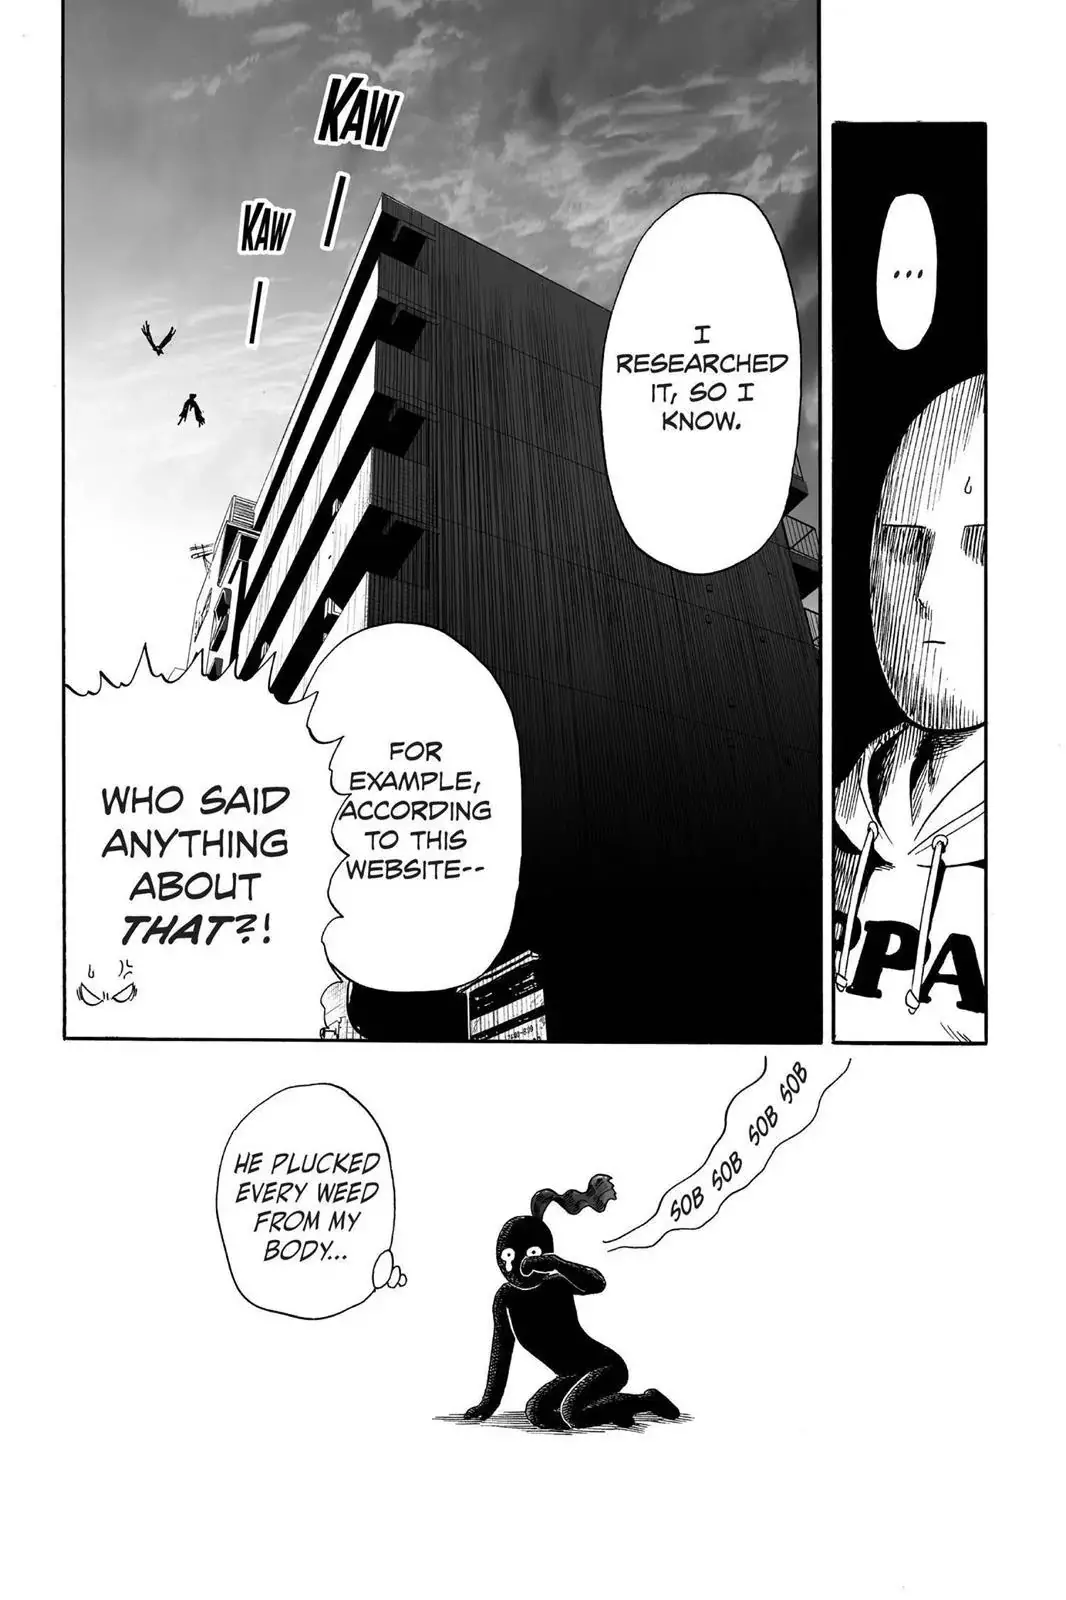 One Punch Man Chapter 20, READ One Punch Man Chapter 20 ONLINE, lost in the cloud genre,lost in the cloud gif,lost in the cloud girl,lost in the cloud goods,lost in the cloud goodreads,lost in the cloud,lost ark cloud gaming,lost odyssey cloud gaming,lost in the cloud fanart,lost in the cloud fanfic,lost in the cloud fandom,lost in the cloud first kiss,lost in the cloud font,lost in the cloud ending,lost in the cloud episode 97,lost in the cloud edit,lost in the cloud explained,lost in the cloud dog,lost in the cloud discord server,lost in the cloud desktop wallpaper,lost in the cloud drawing,can't find my cloud on network,lost in the cloud characters,lost in the cloud chapter 93 release date,lost in the cloud birthday,lost in the cloud birthday art,lost in the cloud background,lost in the cloud banner,lost in the clouds meaning,what is the black cloud in lost,lost in the cloud ao3,lost in the cloud anime,lost in the cloud art,lost in the cloud author twitter,lost in the cloud author instagram,lost in the cloud artist,lost in the cloud acrylic stand,lost in the cloud artist twitter,lost in the cloud art style,lost in the cloud analysis